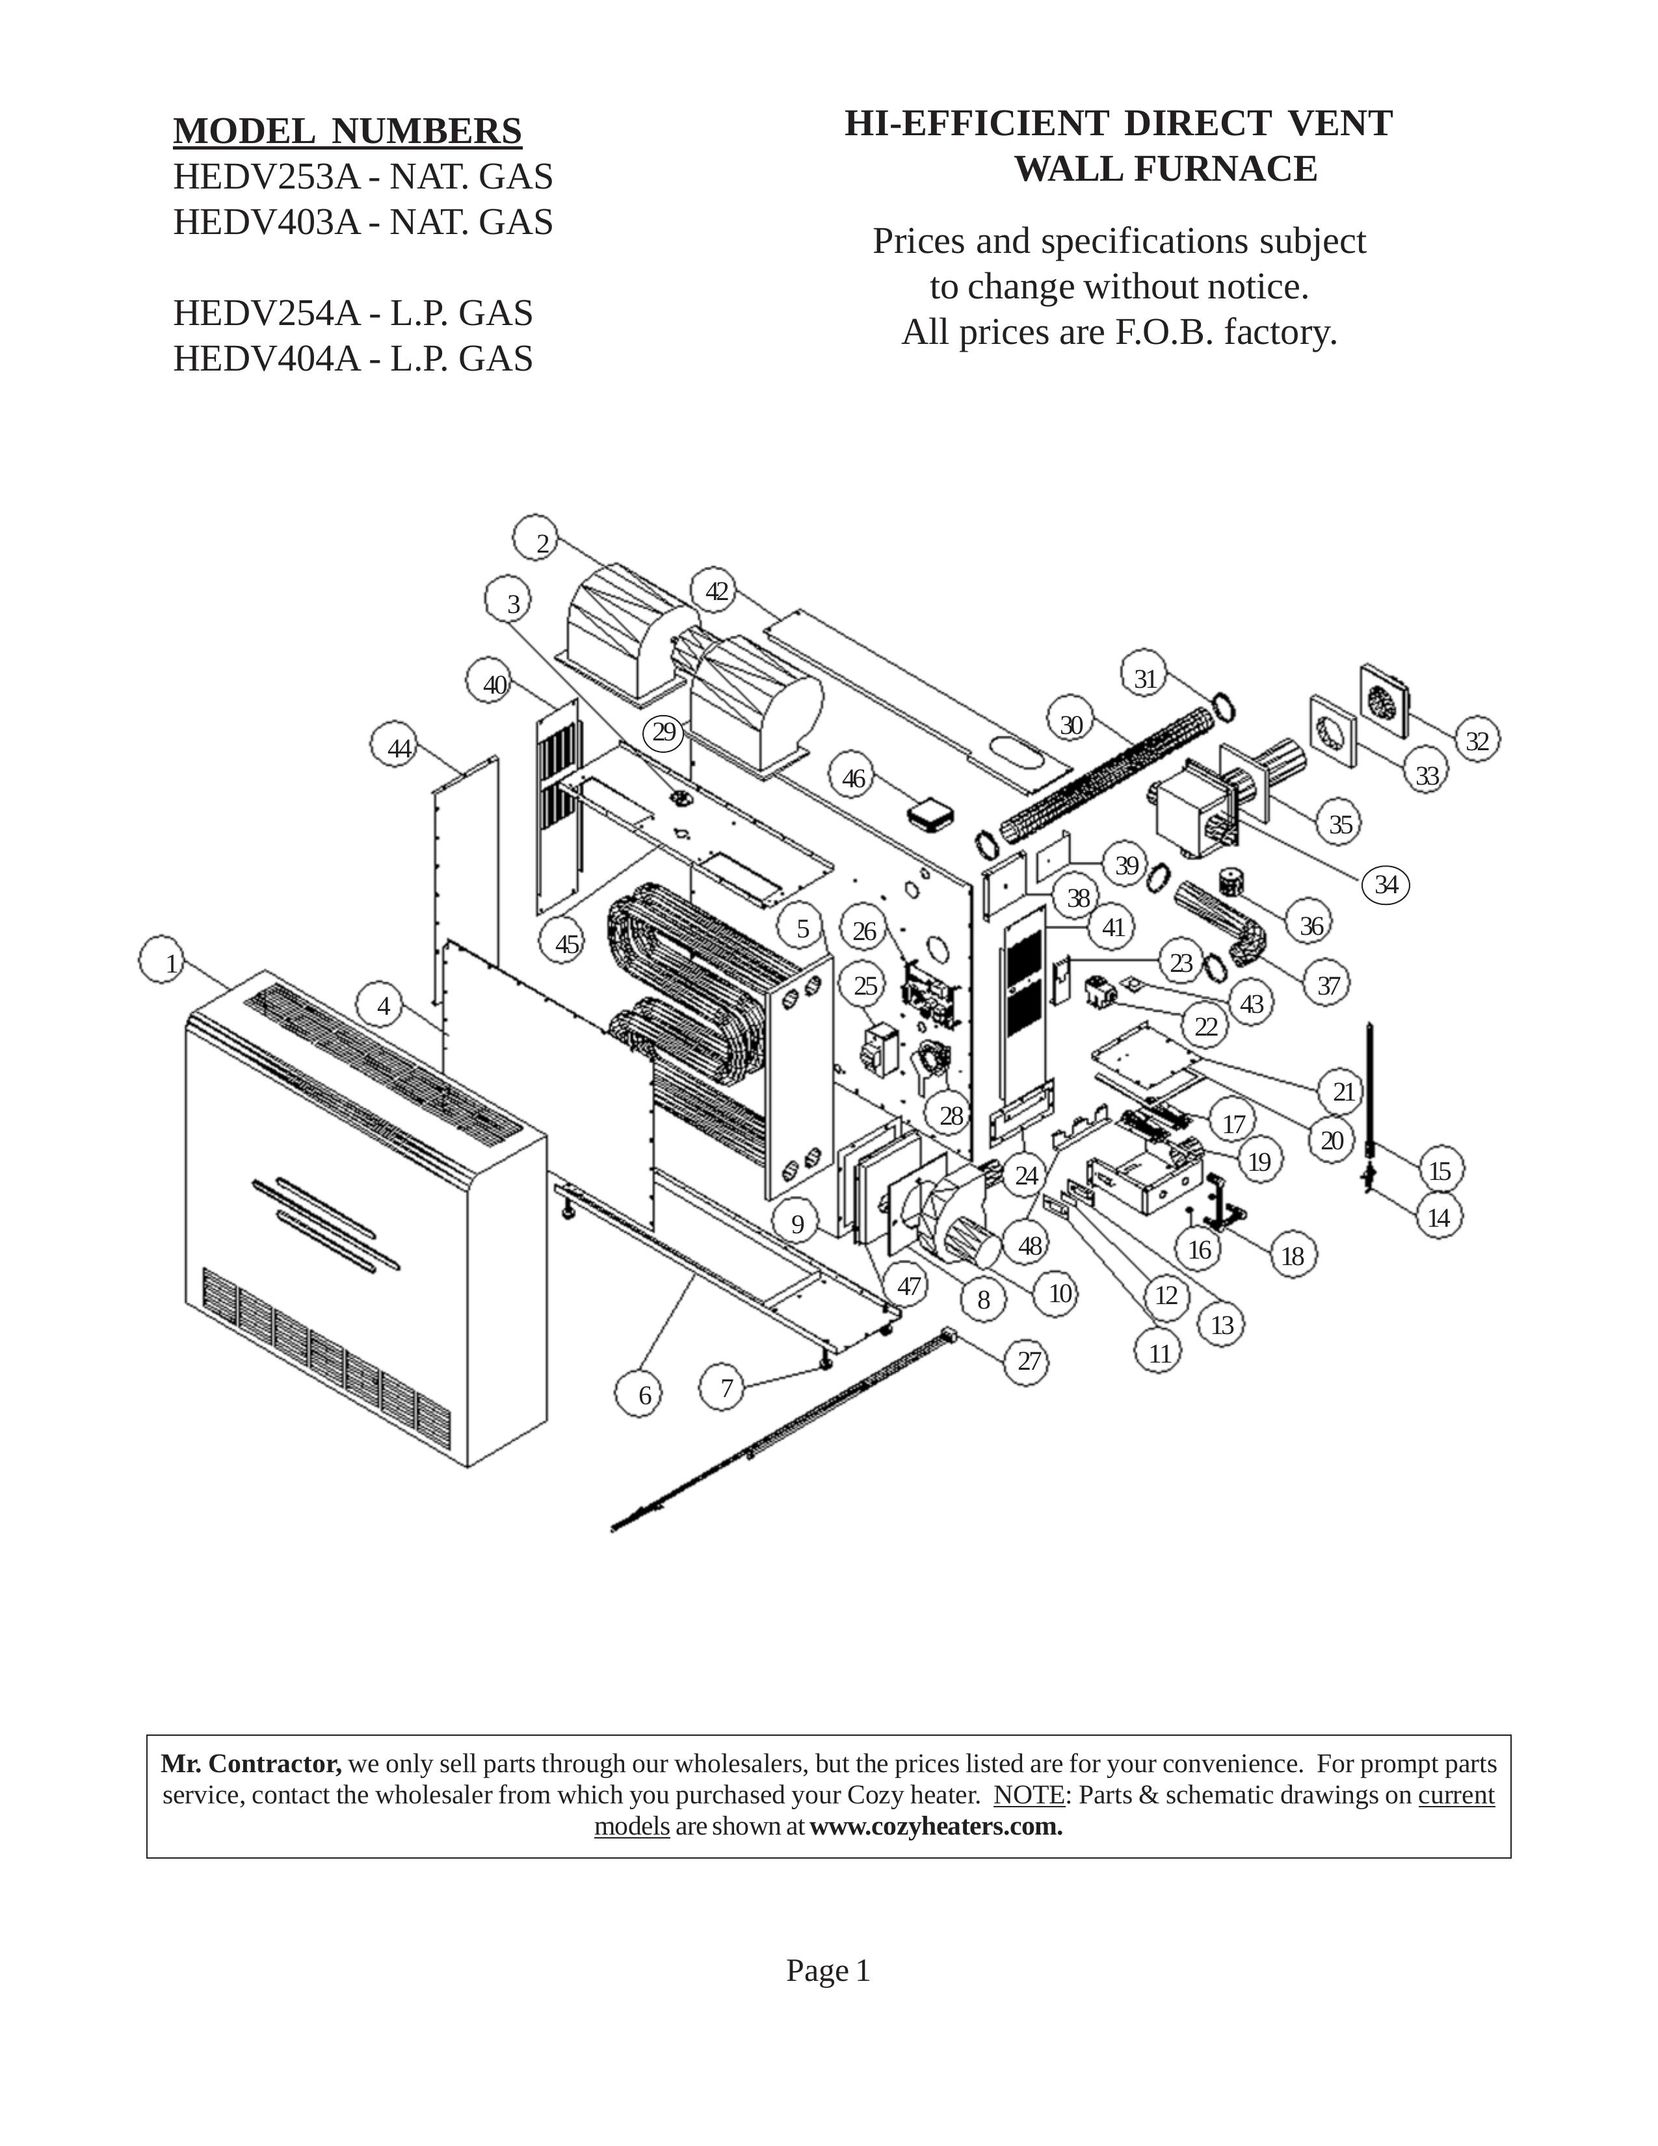 Louisville Tin and Stove HEDV403A Furnace User Manual